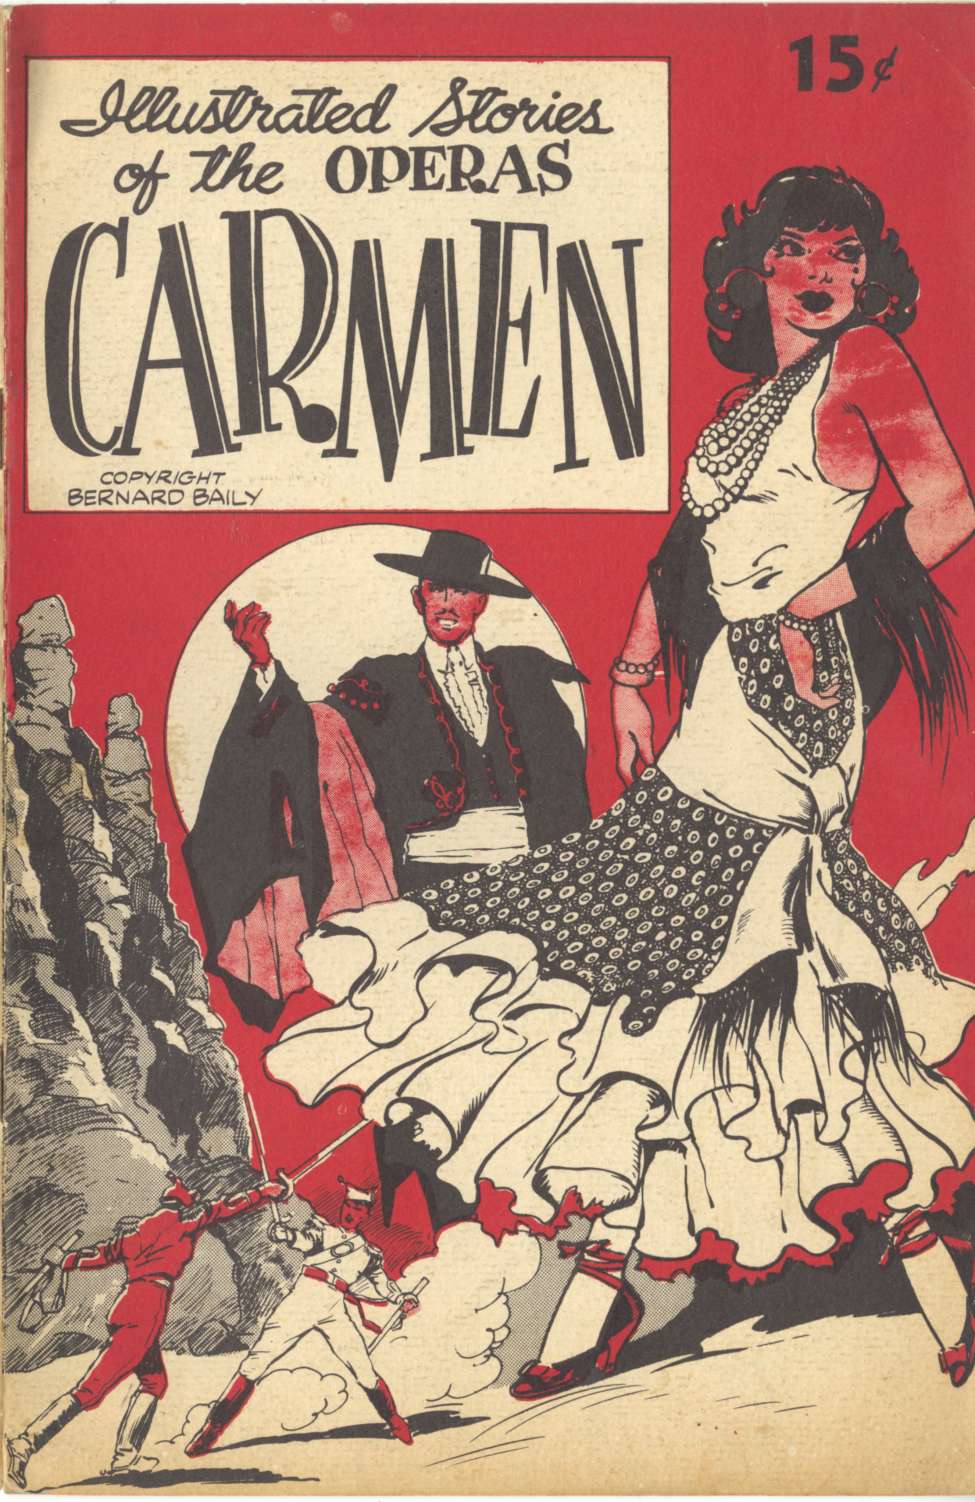 Book Cover For Illustrated Stories of the Operas: Carmen